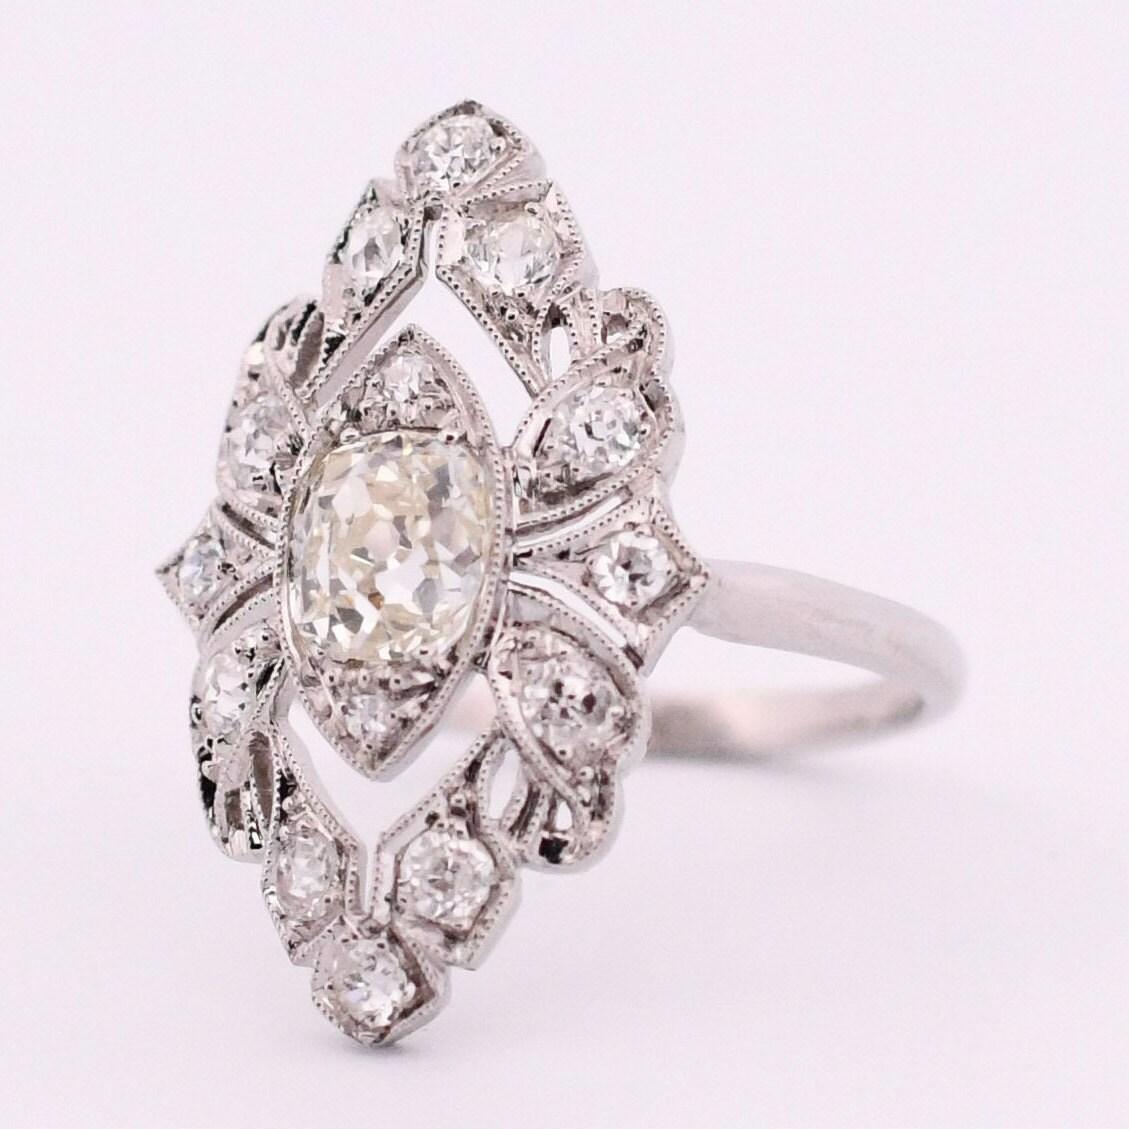 Circa 1910's Edwardian Platinum TRAUB Floral 1.02Ct Old Mine Cut Diamond Antique In Good Condition For Sale In Addison, TX